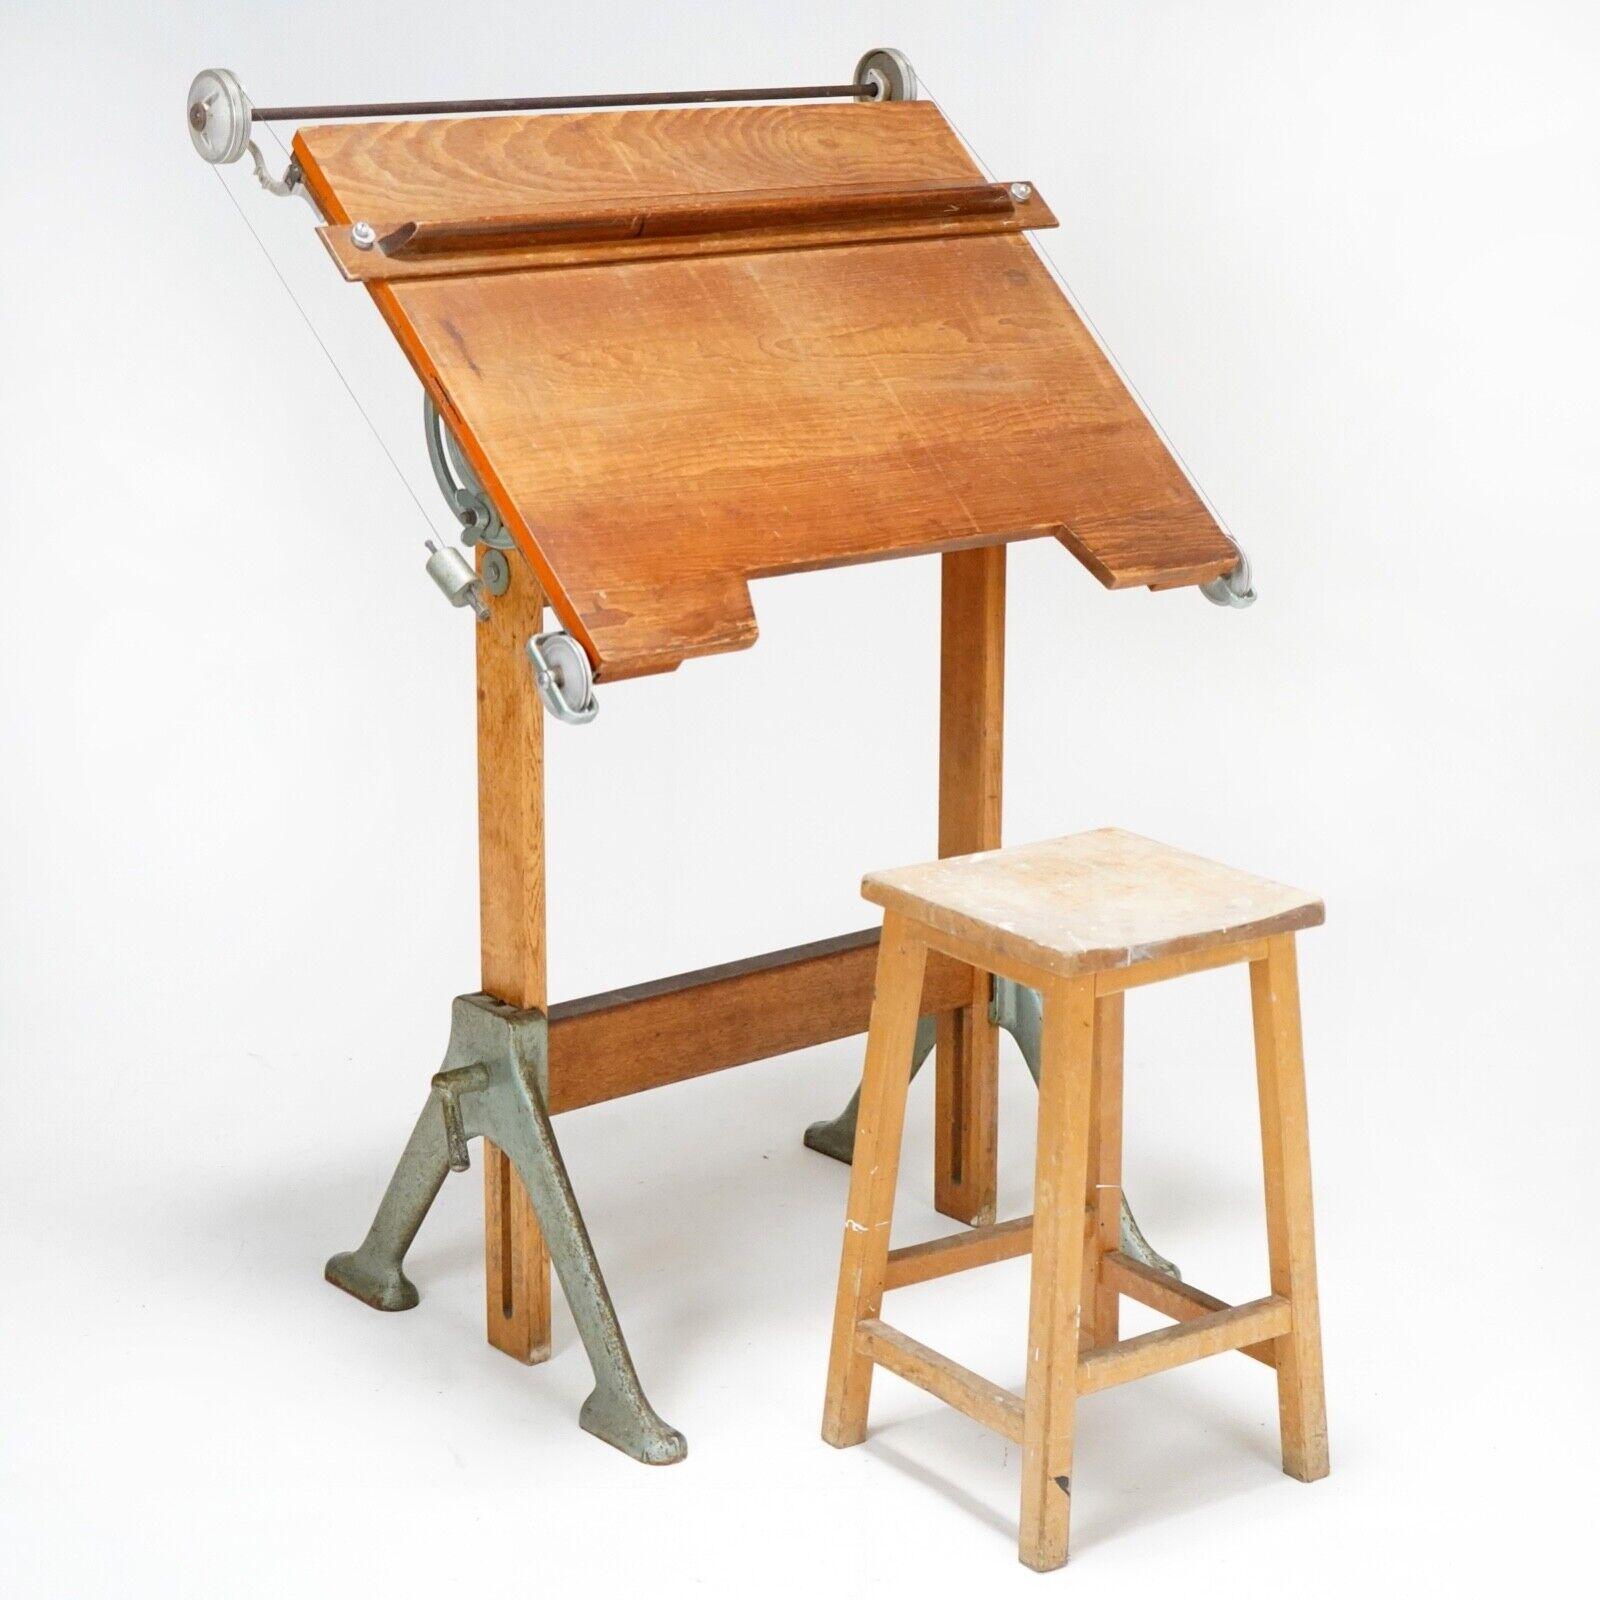 A 1940's Architect's drawing table with cast iron metal base, Beech & Oak frame and top.
 A fully working piece with great pull system. It moves up and down as well as surface tilting and ruler that slides. 
A industrial piece with a elegant look.